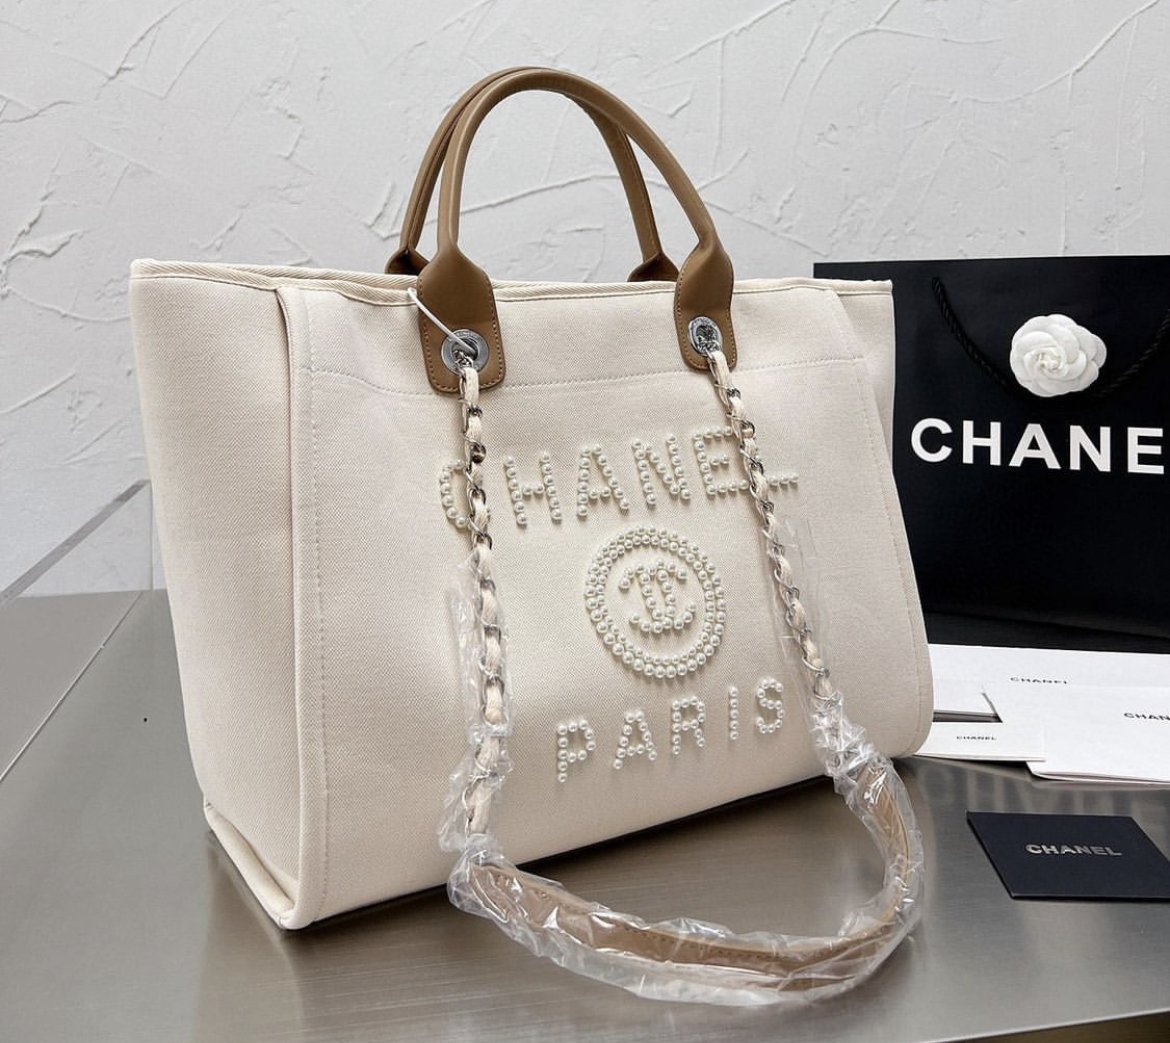 chanel deauville tote bag pink